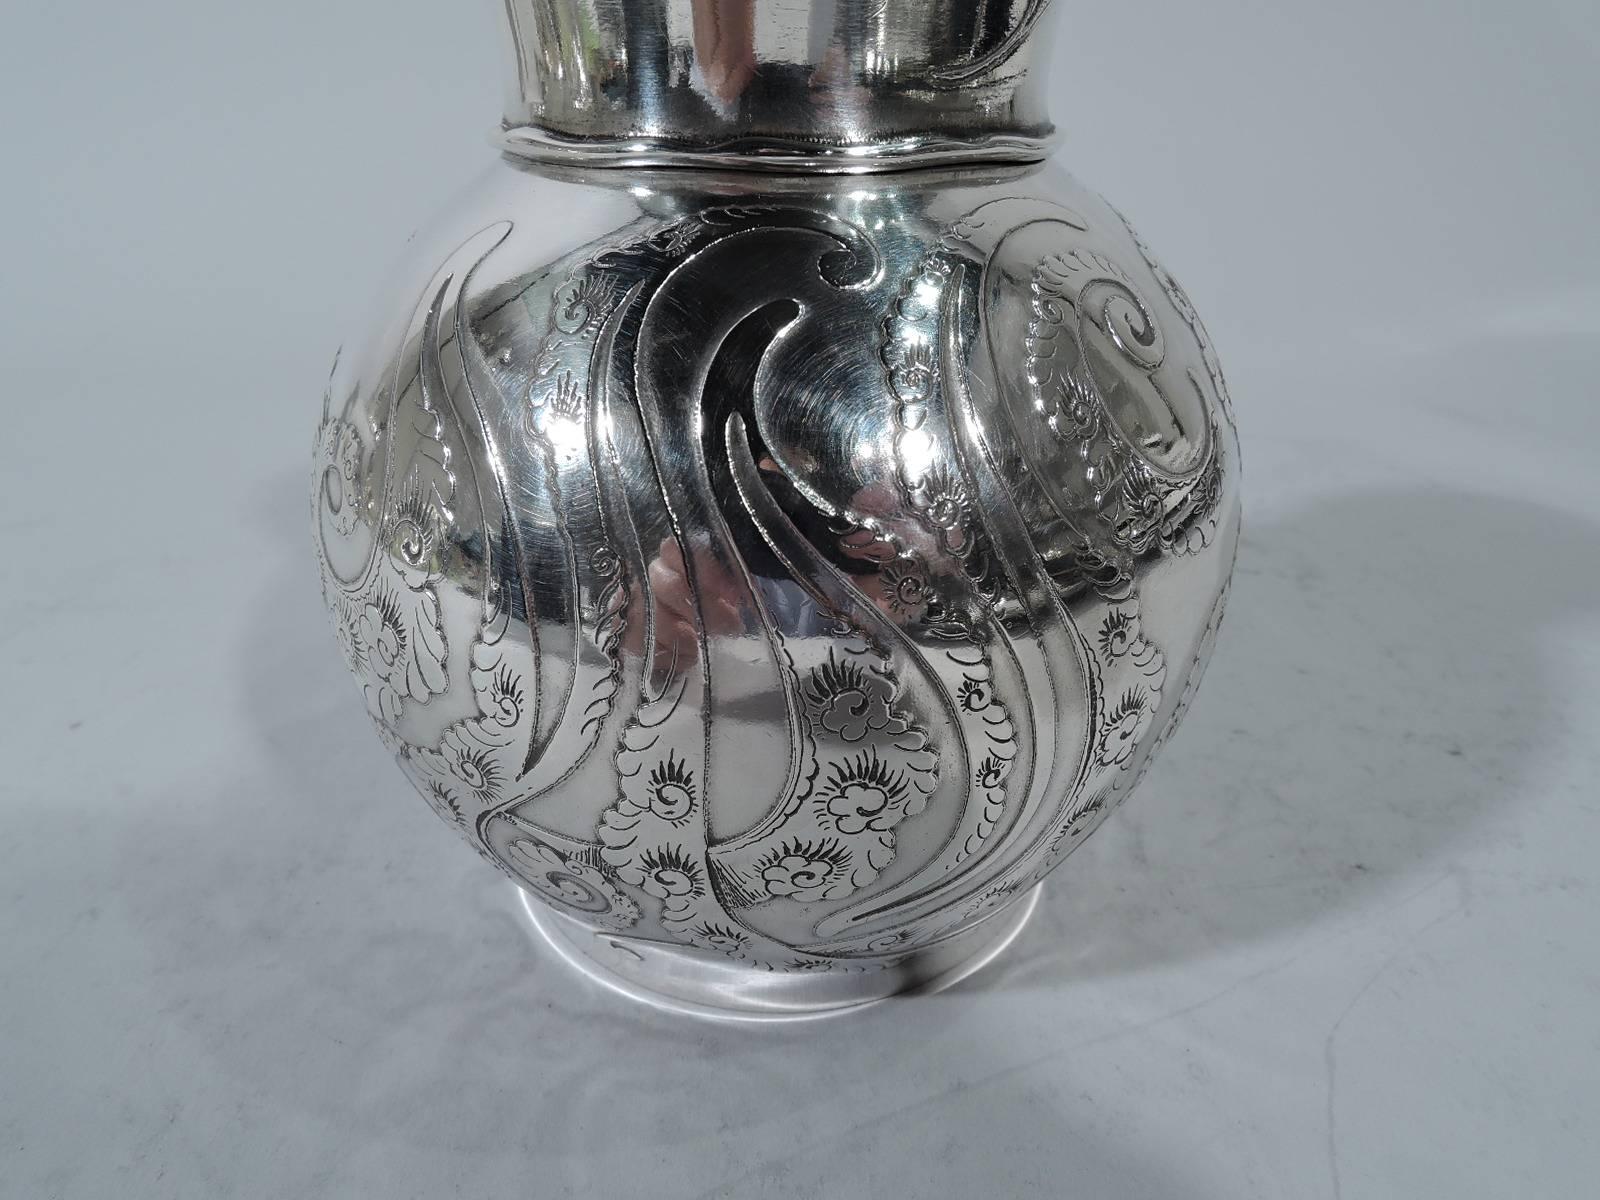 19th Century Wonderful Tiffany Aesthetic Japonesque Sterling Silver Tea Caddy